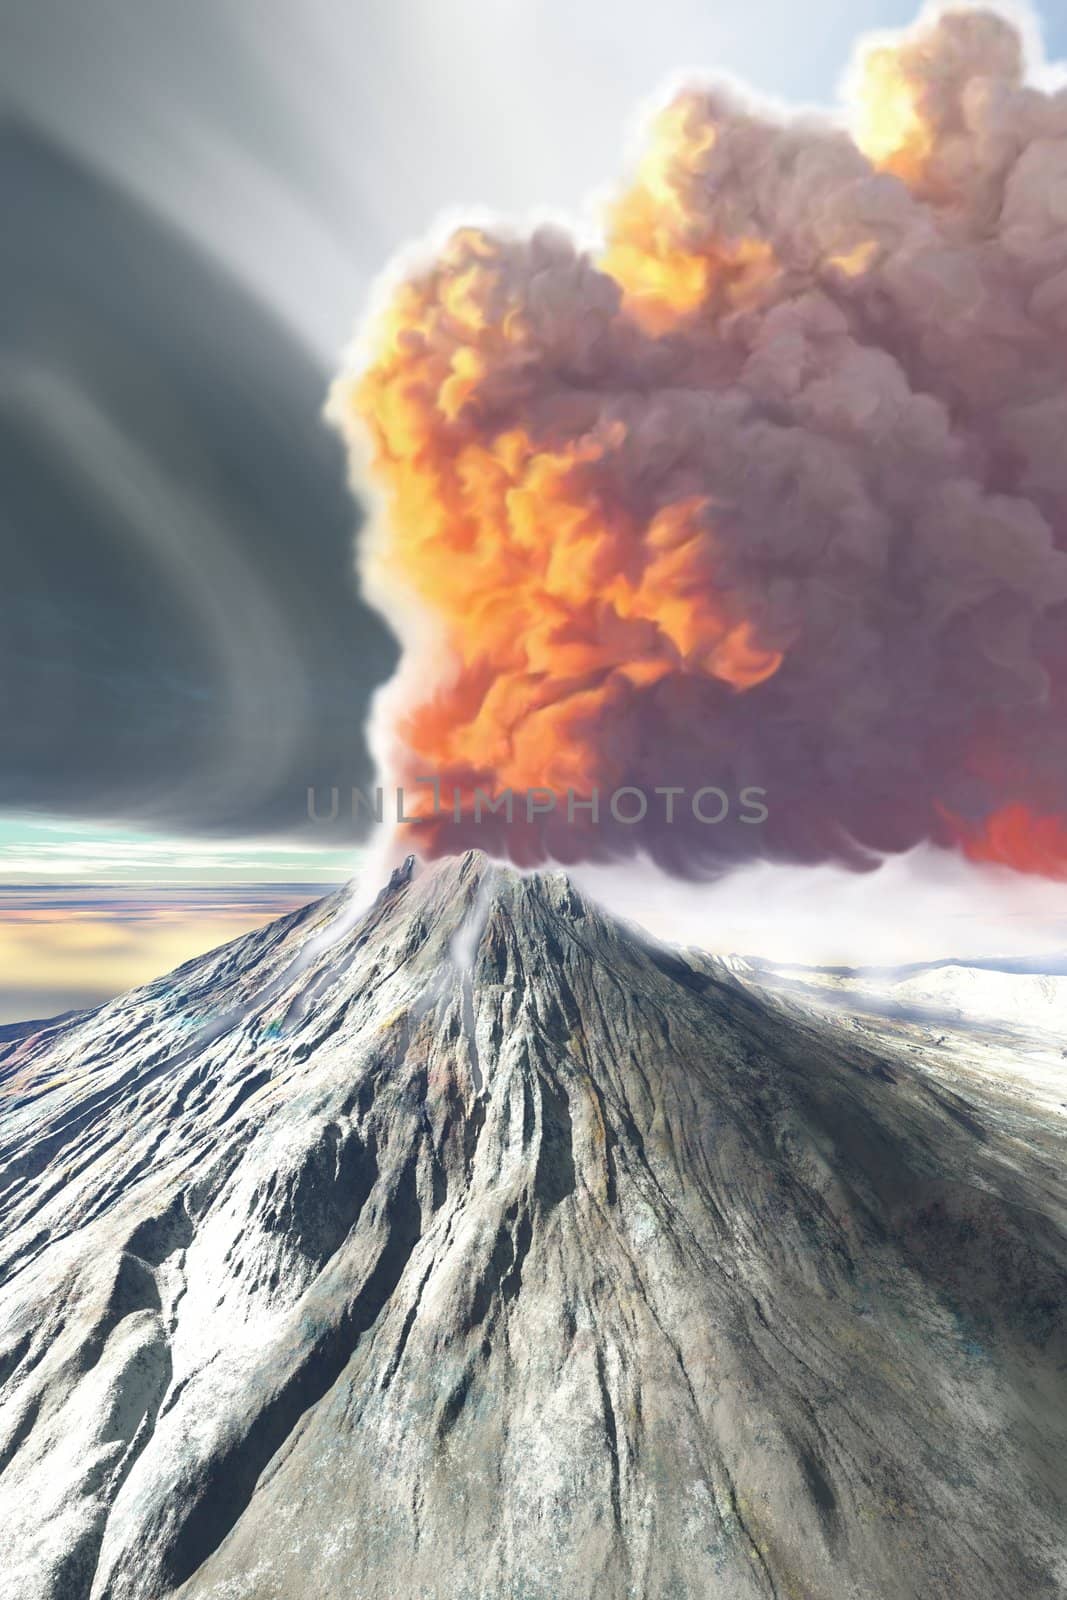 A volcano comes to life with billowing smoke.